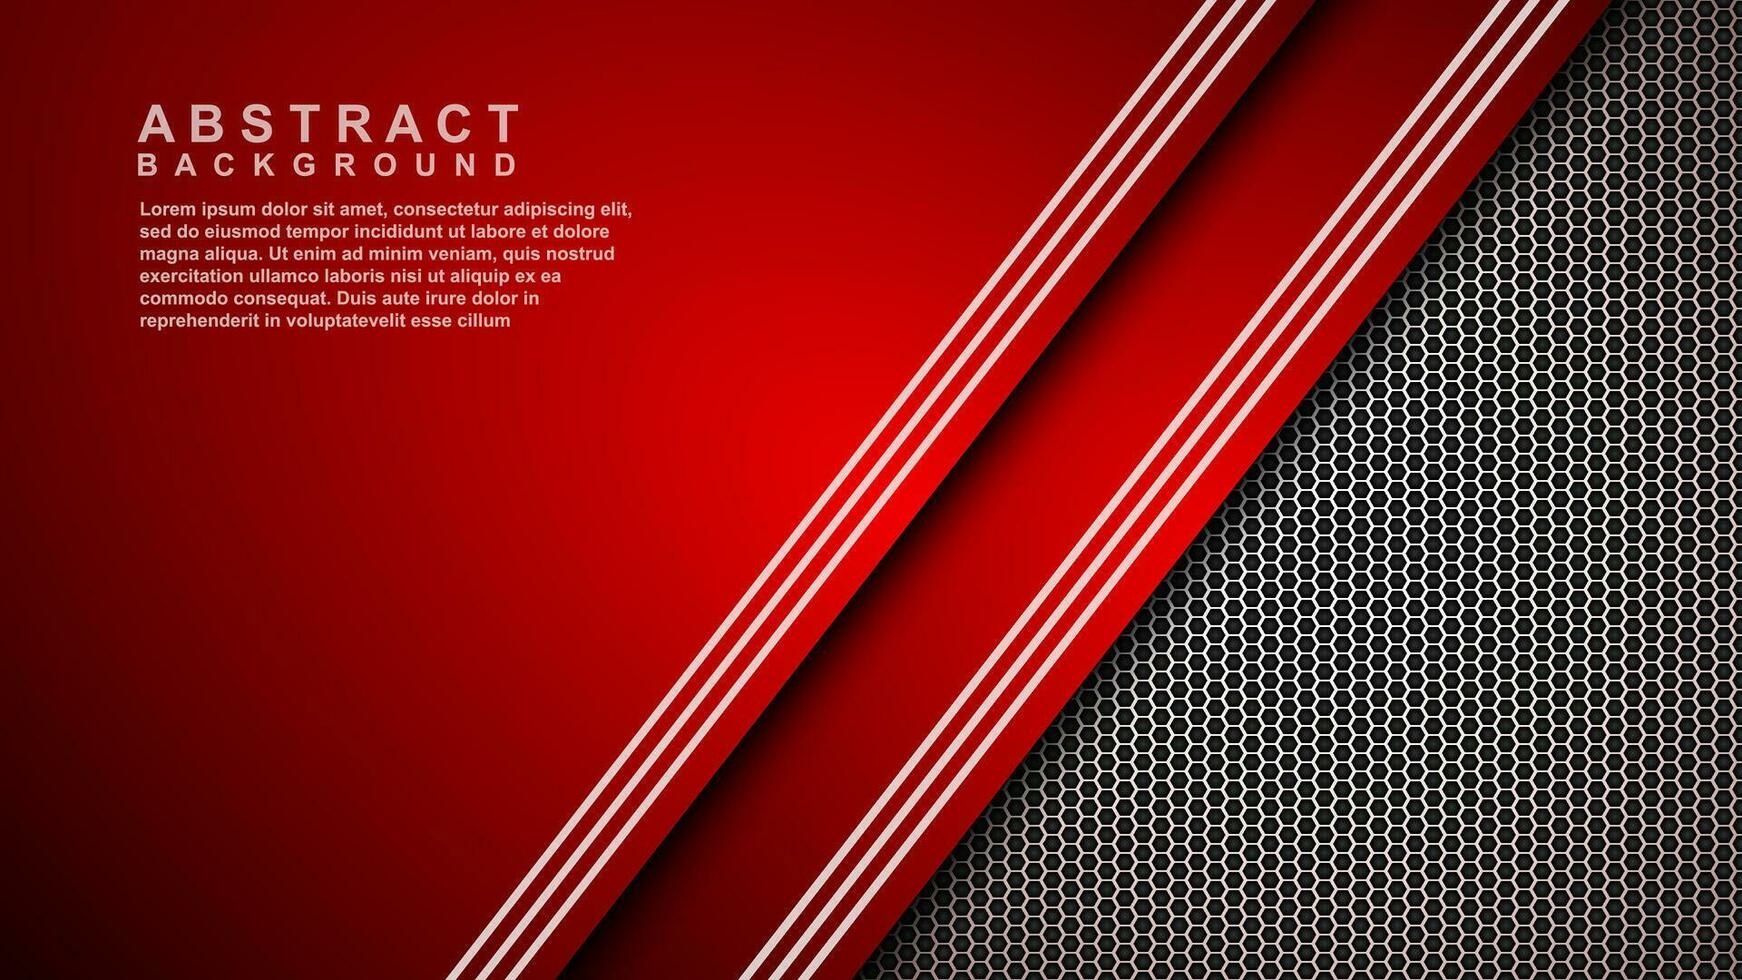 Abstract red overlapping layers background combined with silver textured lines decoration. Luxury and premium concept vector design template for using modern cover elements, banners, cards